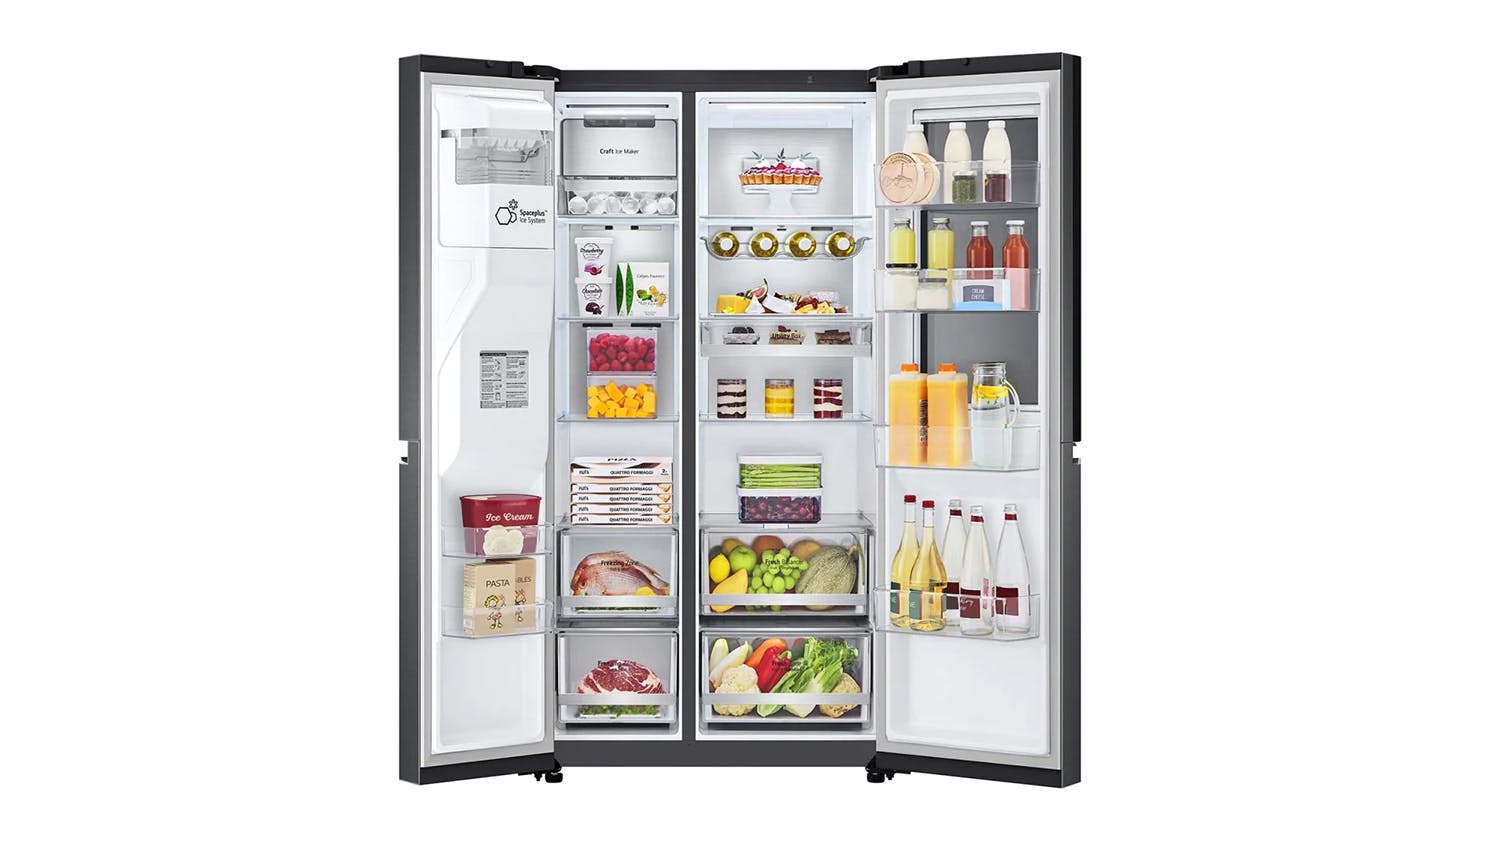 LG 635L InstaView Side By Side Fridge Freezer with Ice and Water Dispenser